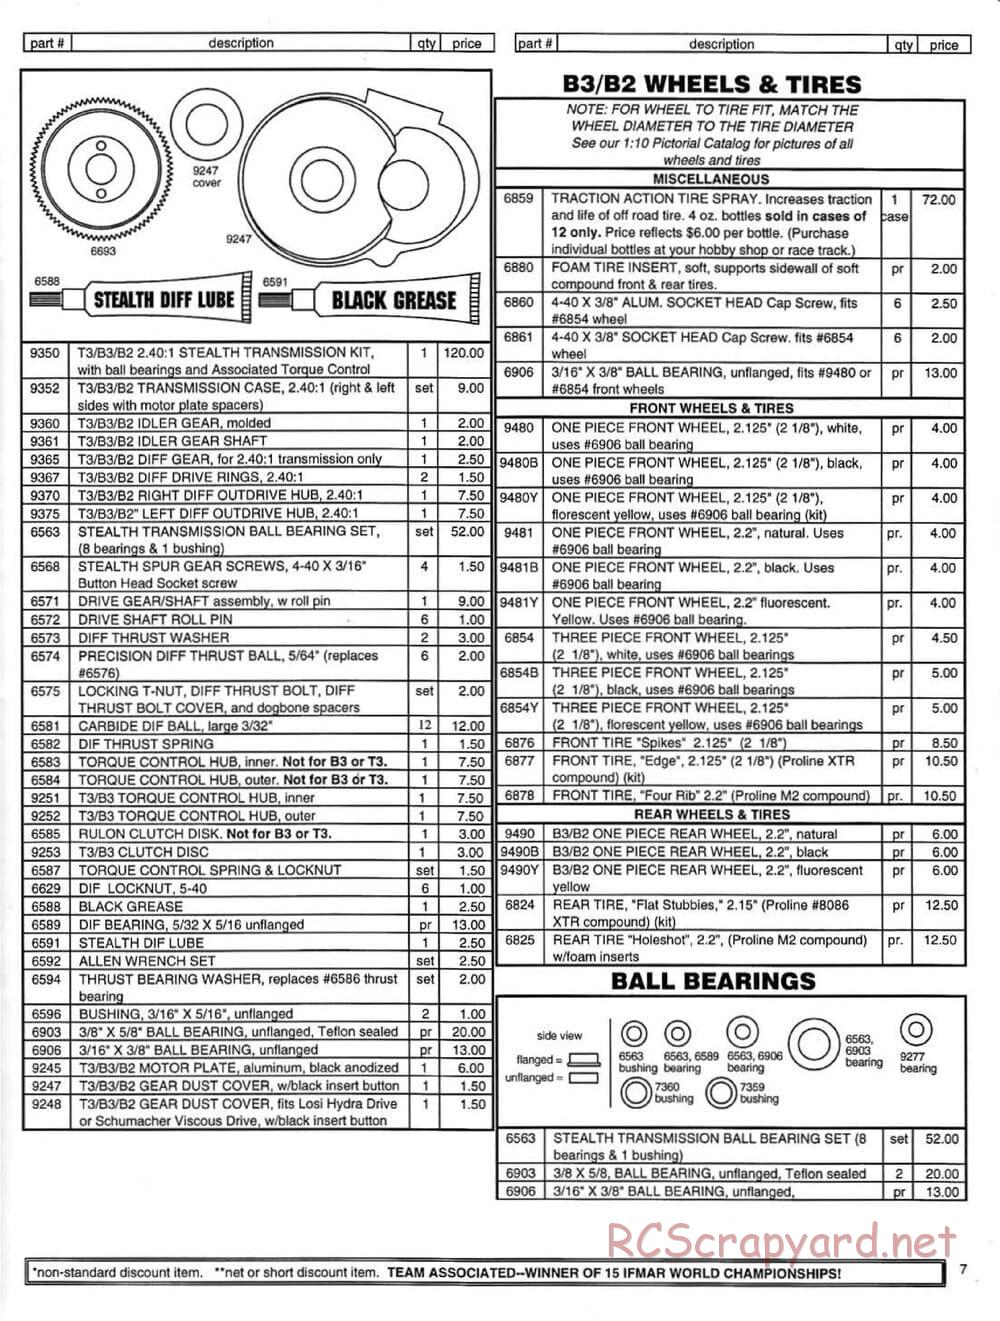 Team Associated - RC10 B3 - 1997 Parts Catalog - Page 7